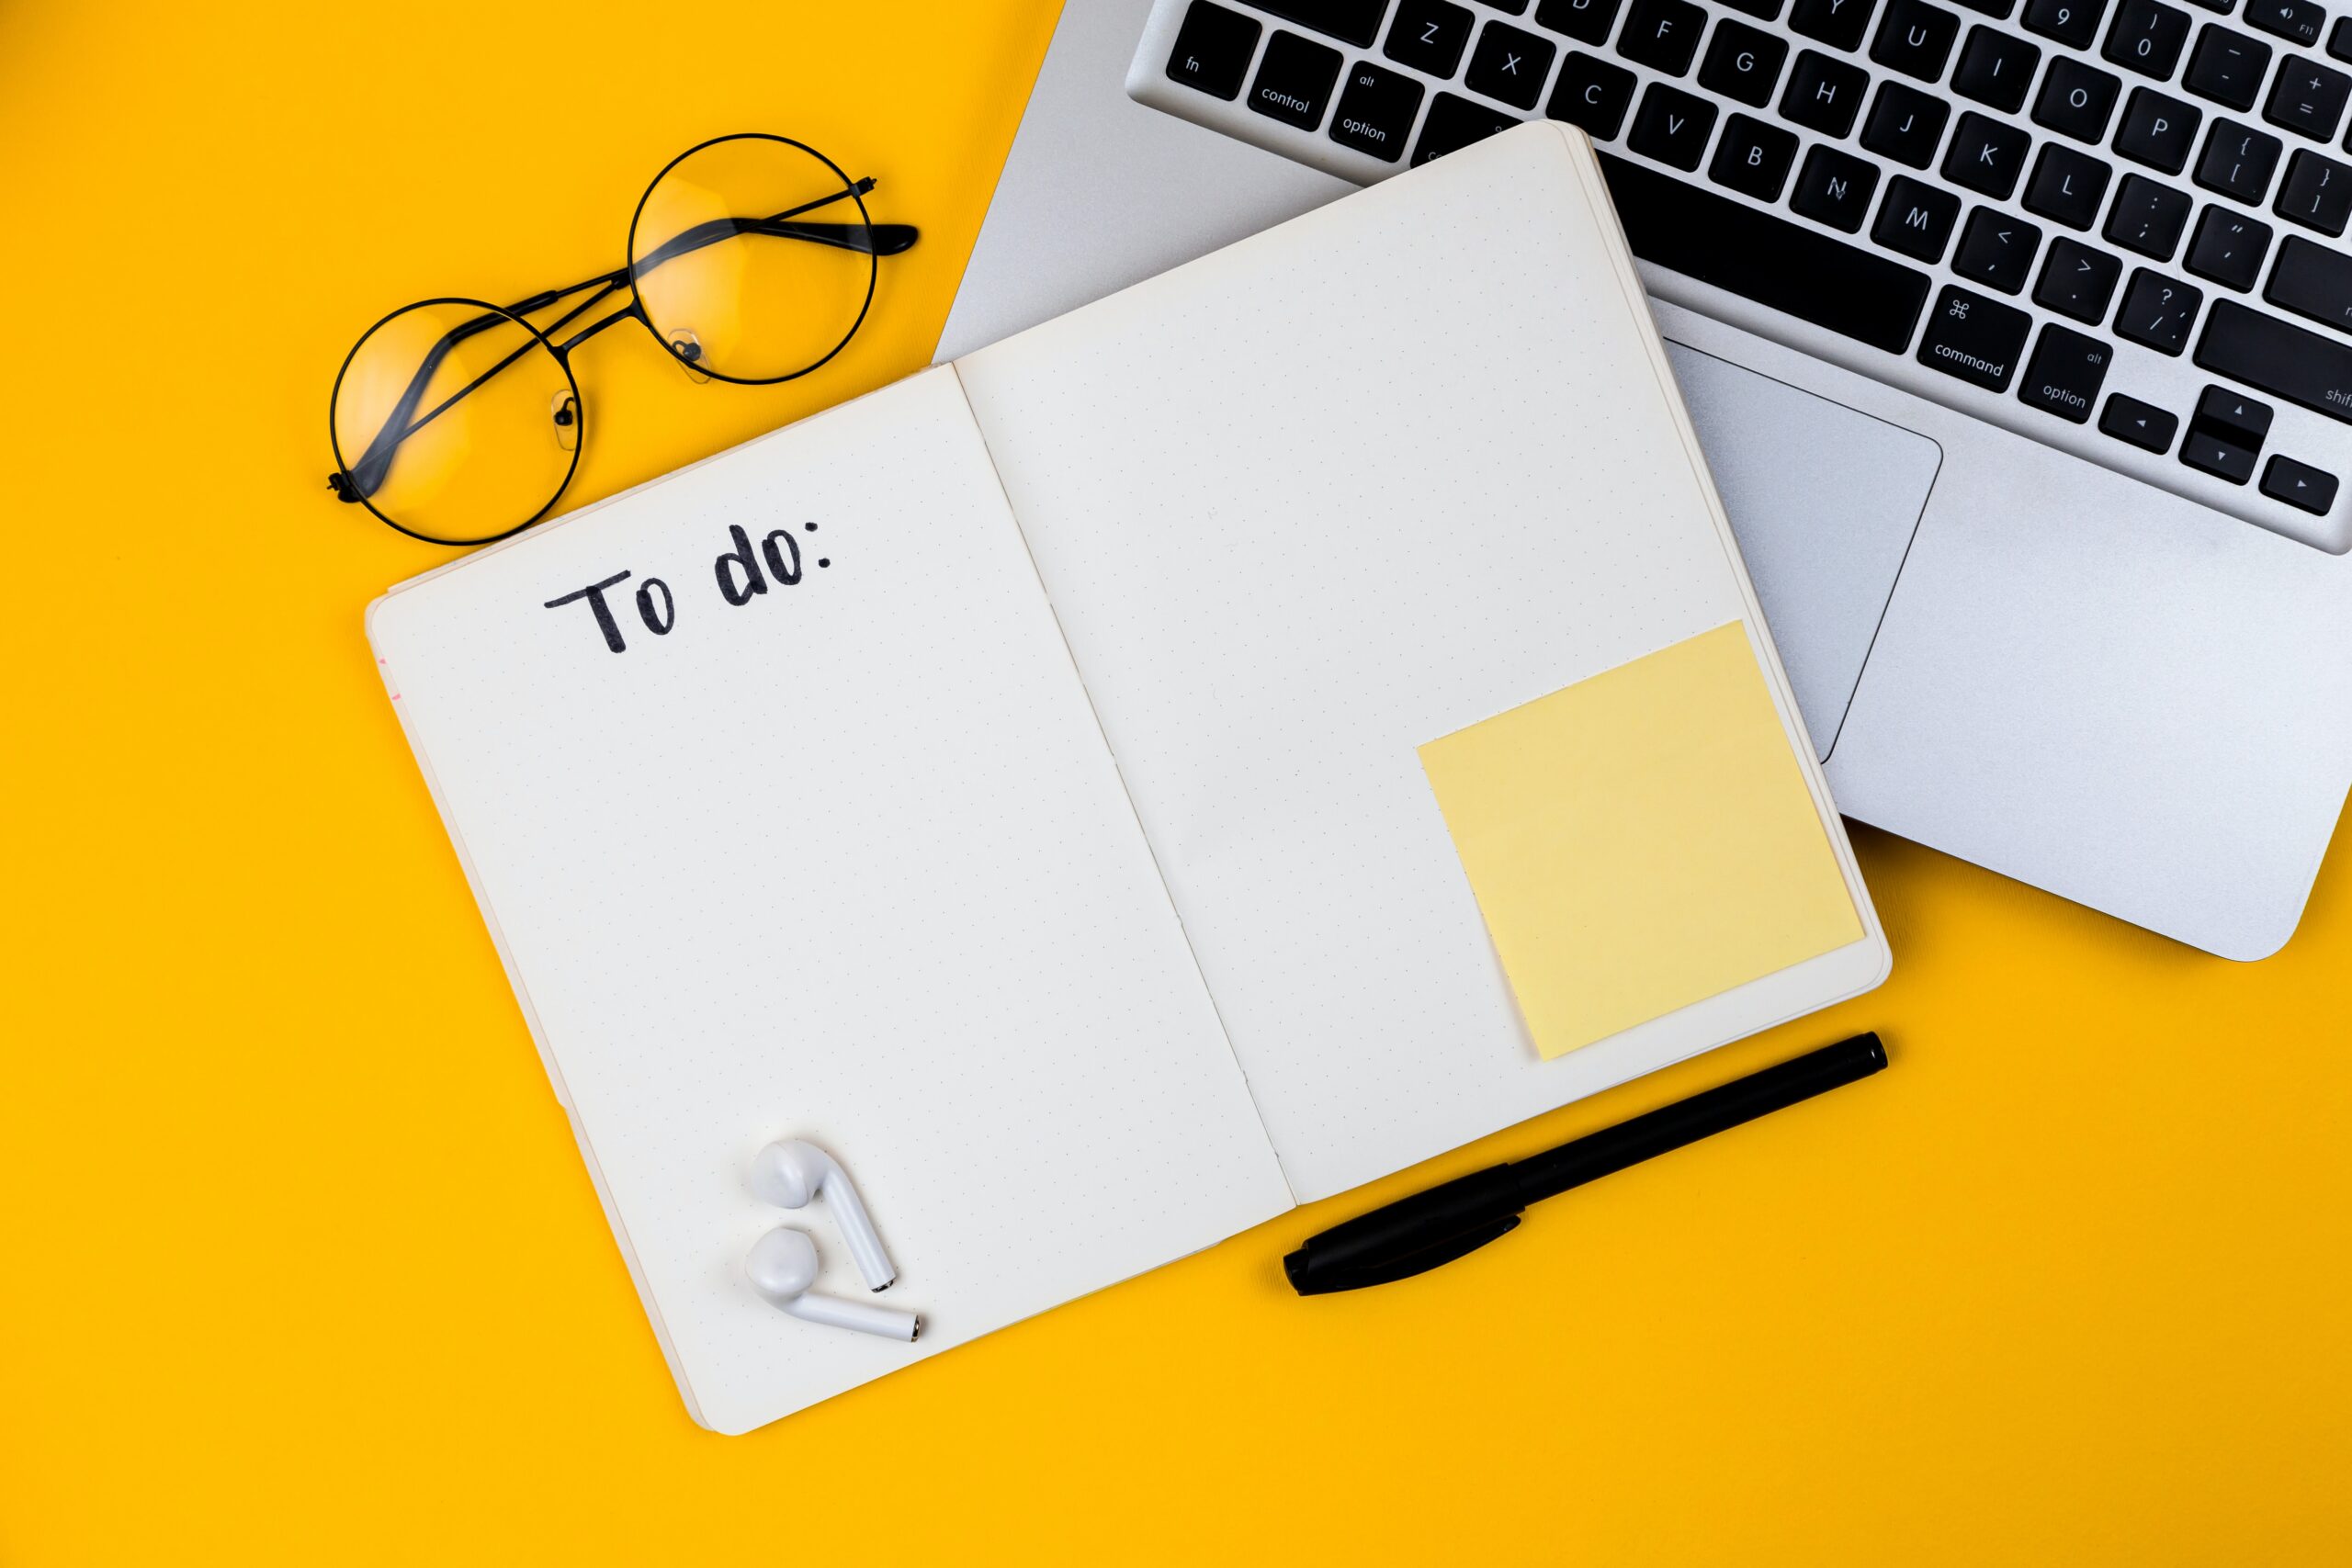 An image of a to-do list and a computer with a yellow background